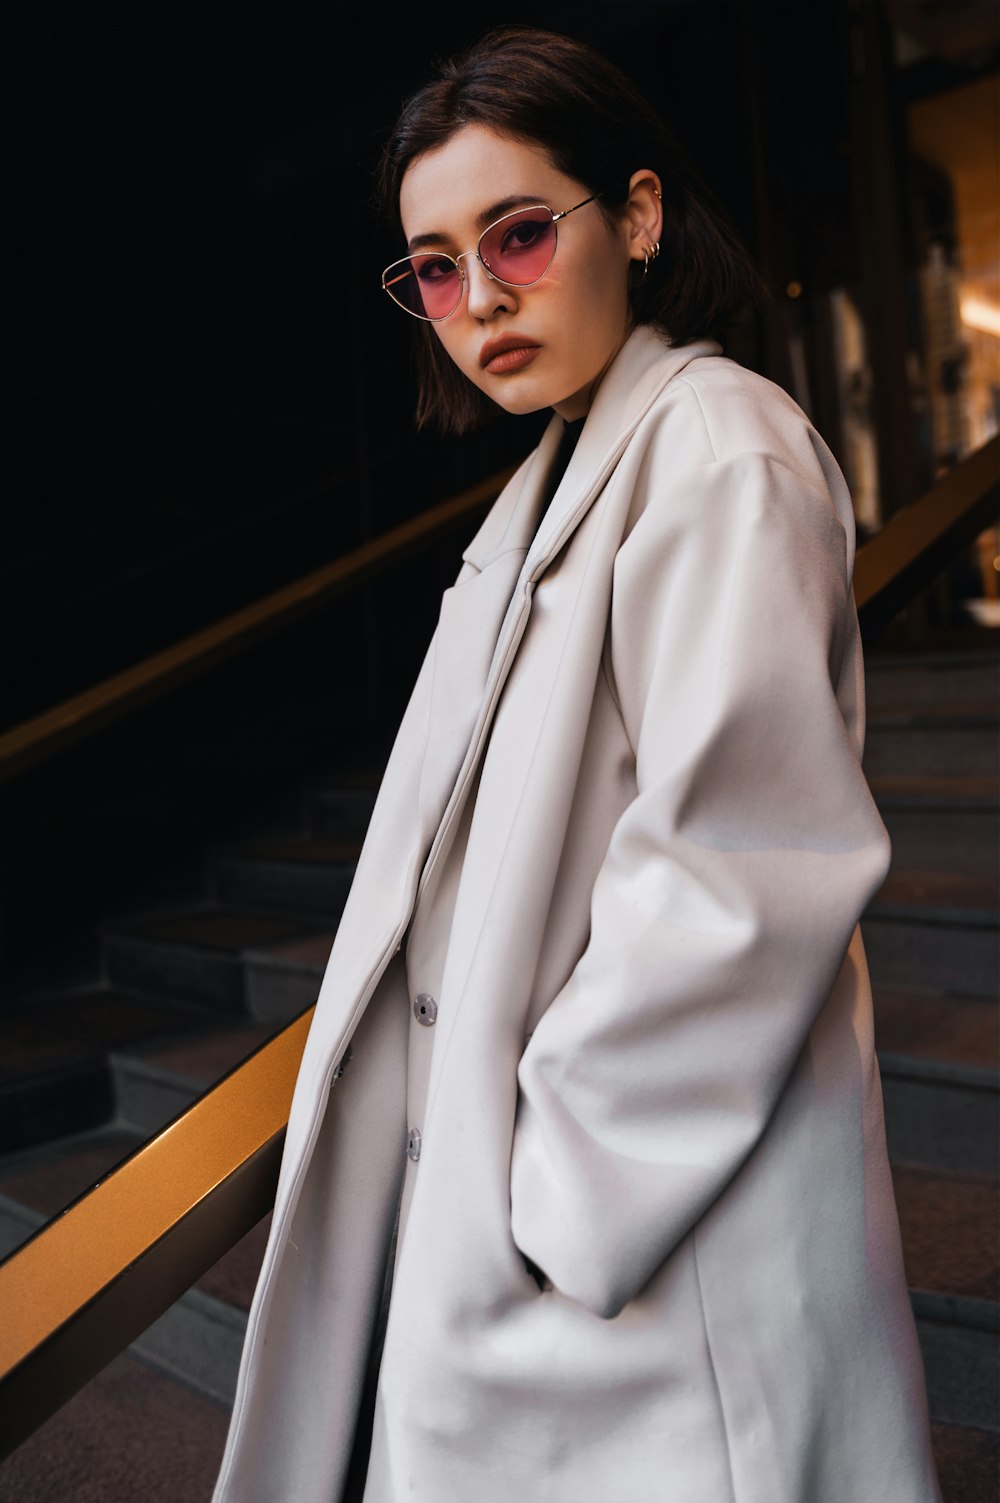 a woman wearing a white coat and sunglasses